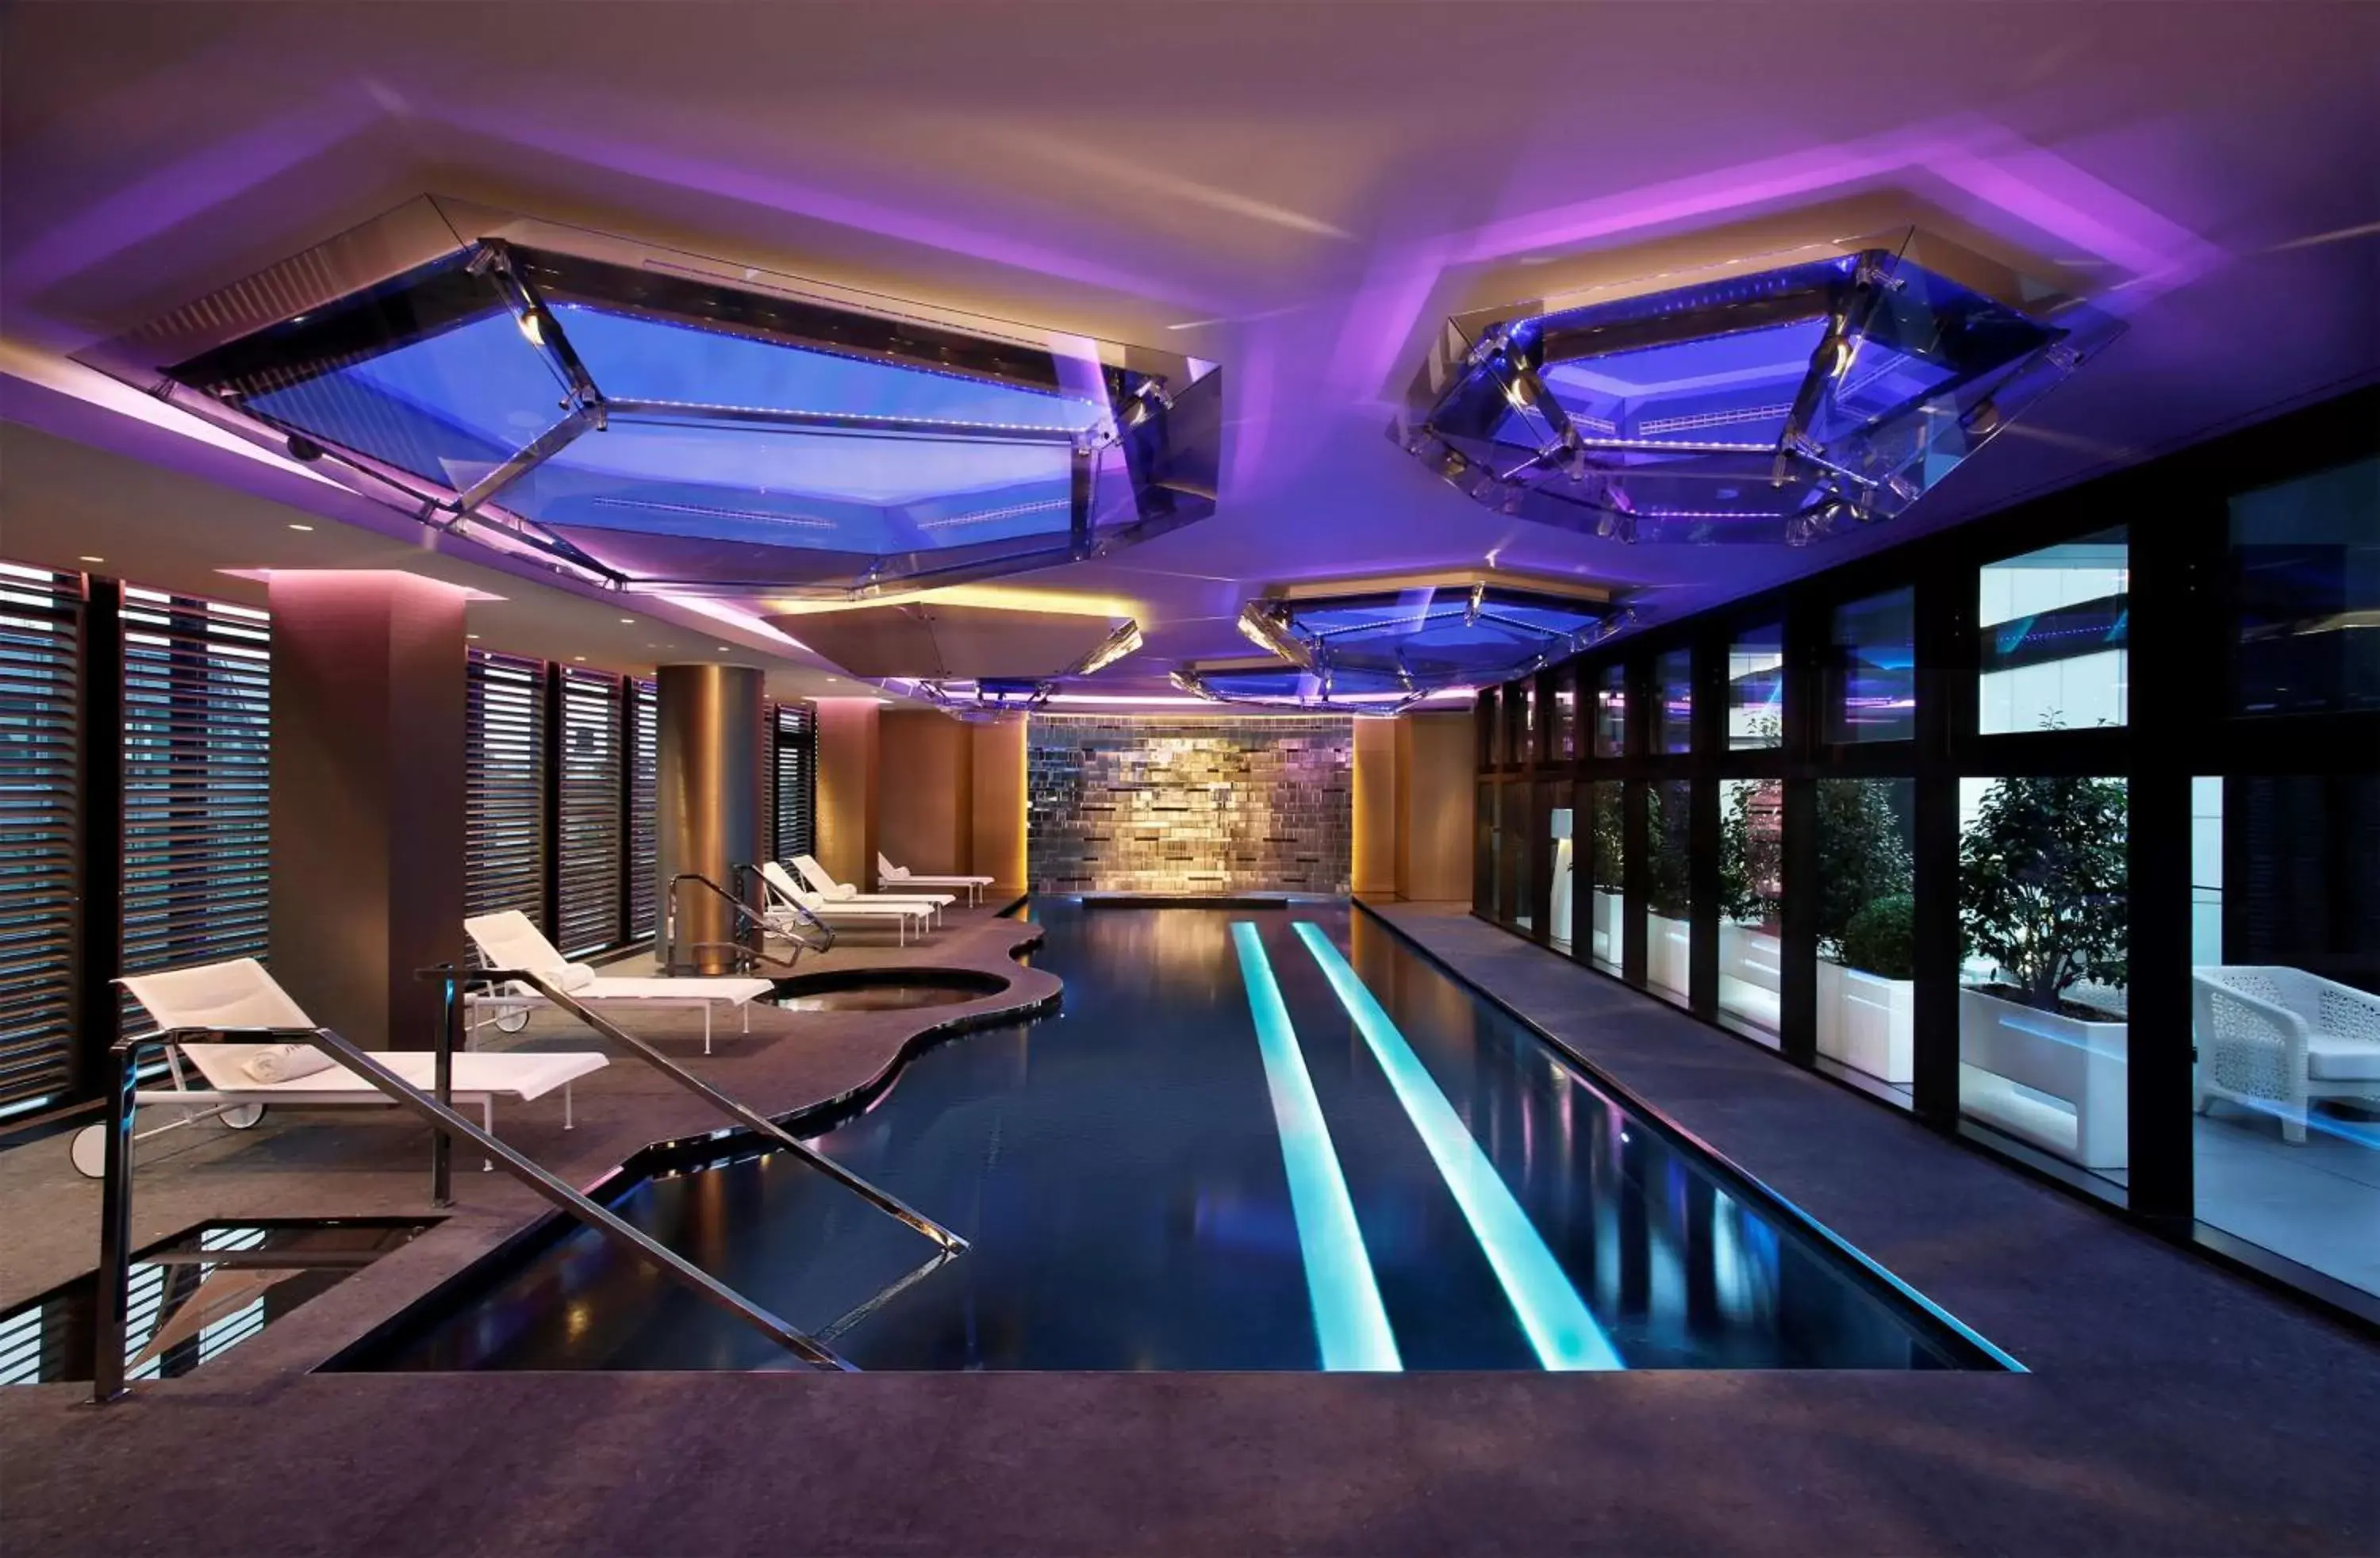 On site, Swimming Pool in Excelsior Hotel Gallia, a Luxury Collection Hotel, Milan